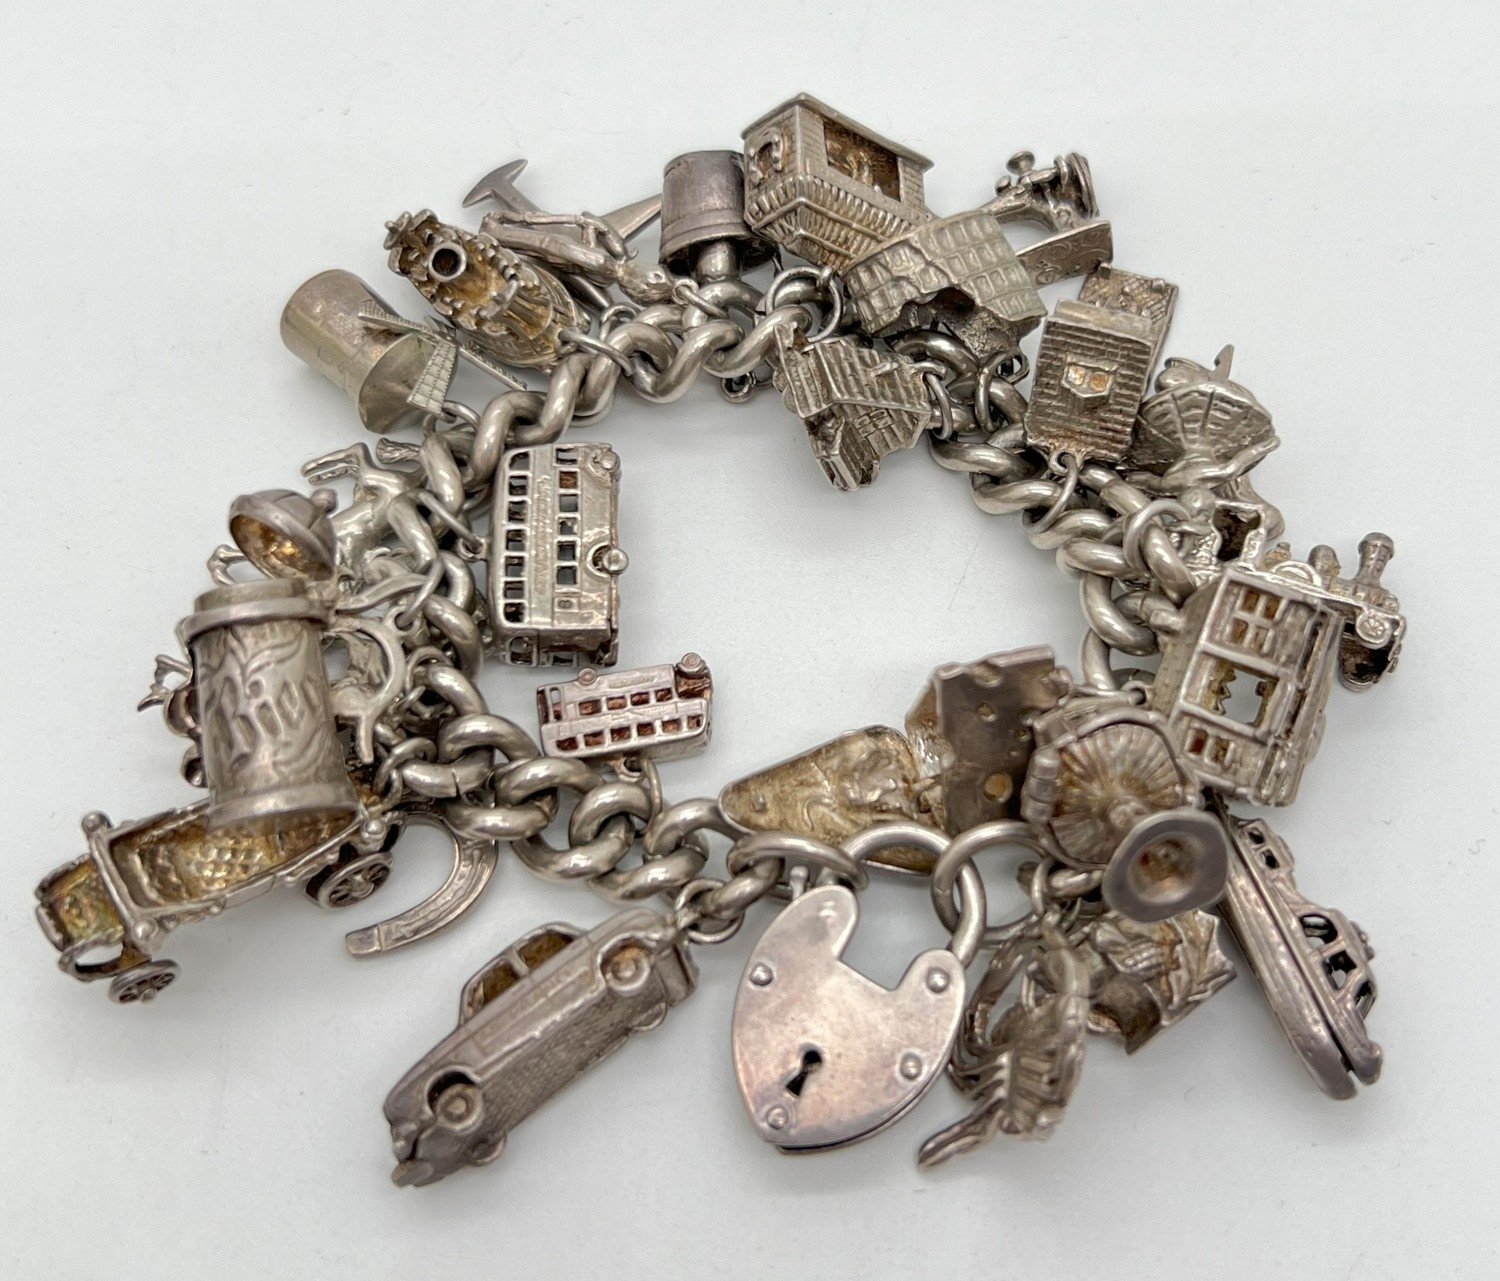 A vintage silver charm bracelet with large padlock clasp and 29 silver and white charms - some